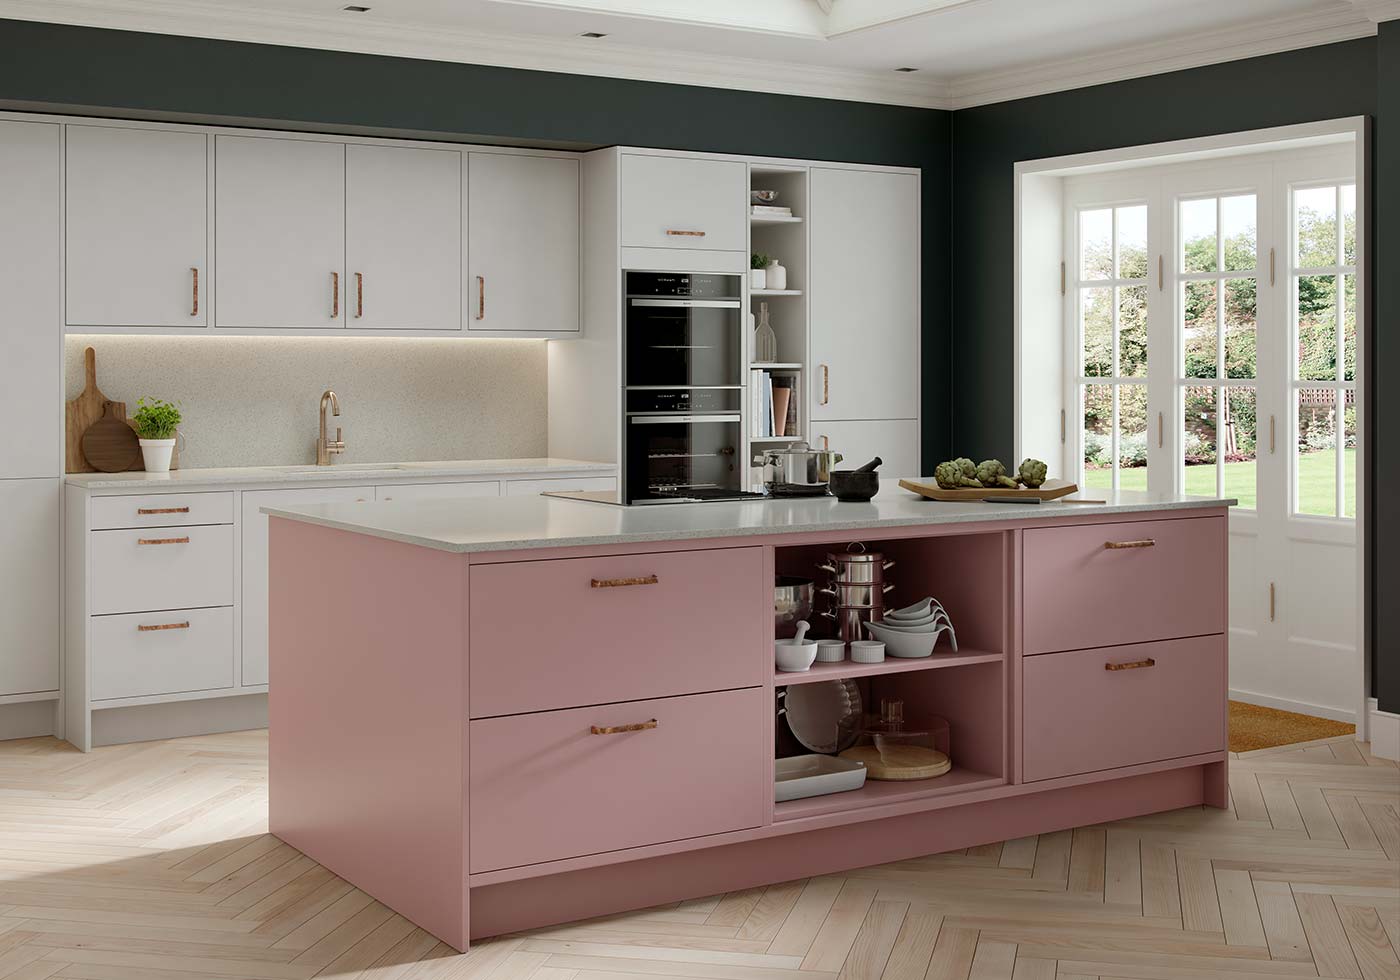 Pink and grey kitchen